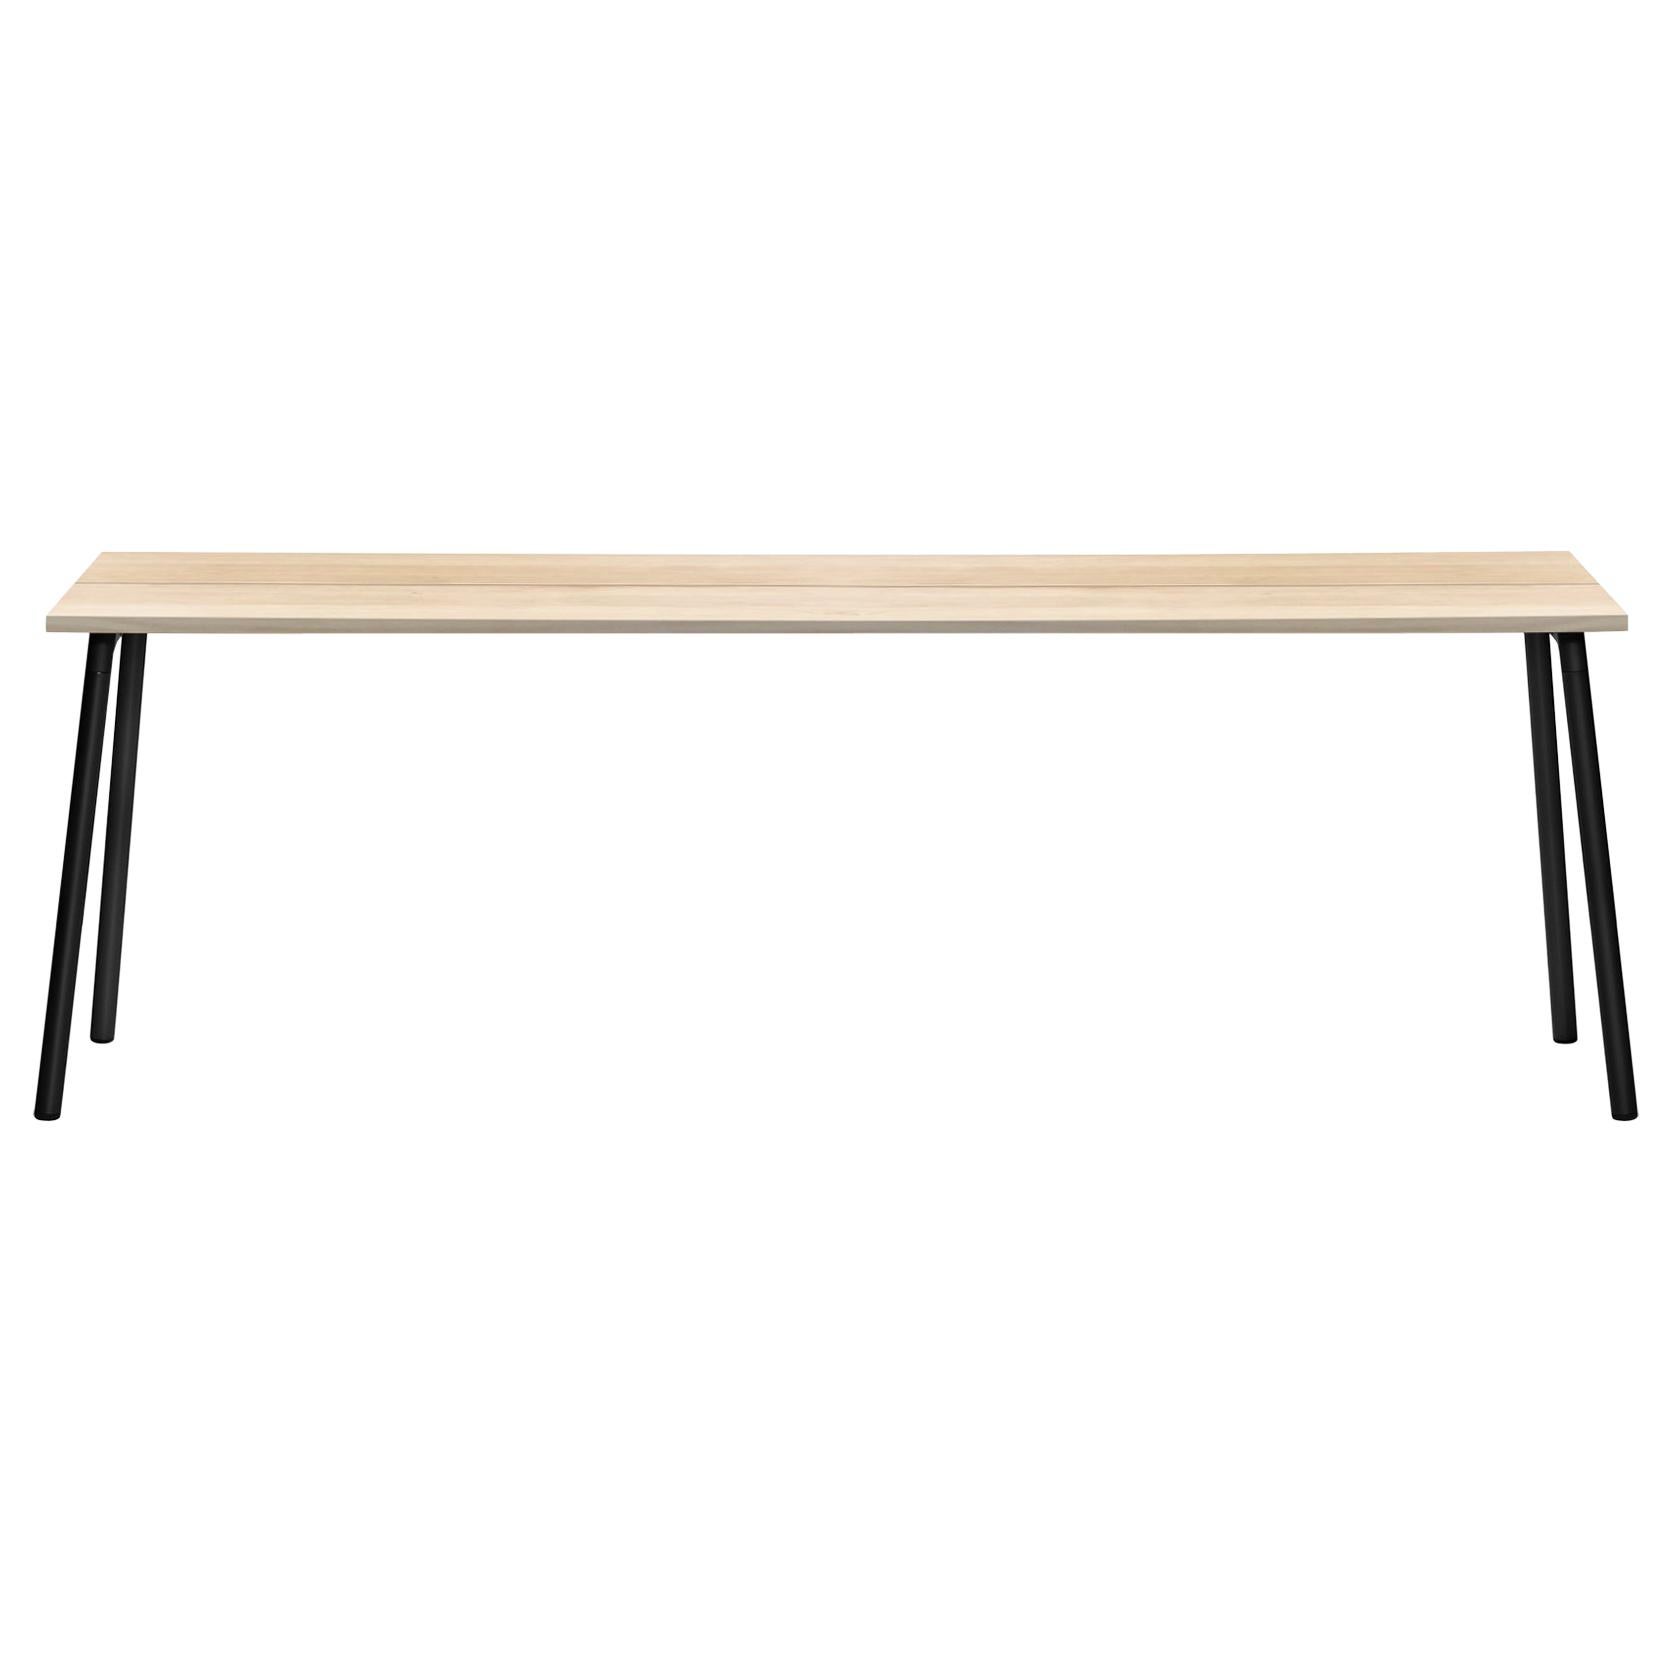 Emeco Run 86" Side Table with Black Frame & Wood Top by Sam Hecht and Kim Colin For Sale